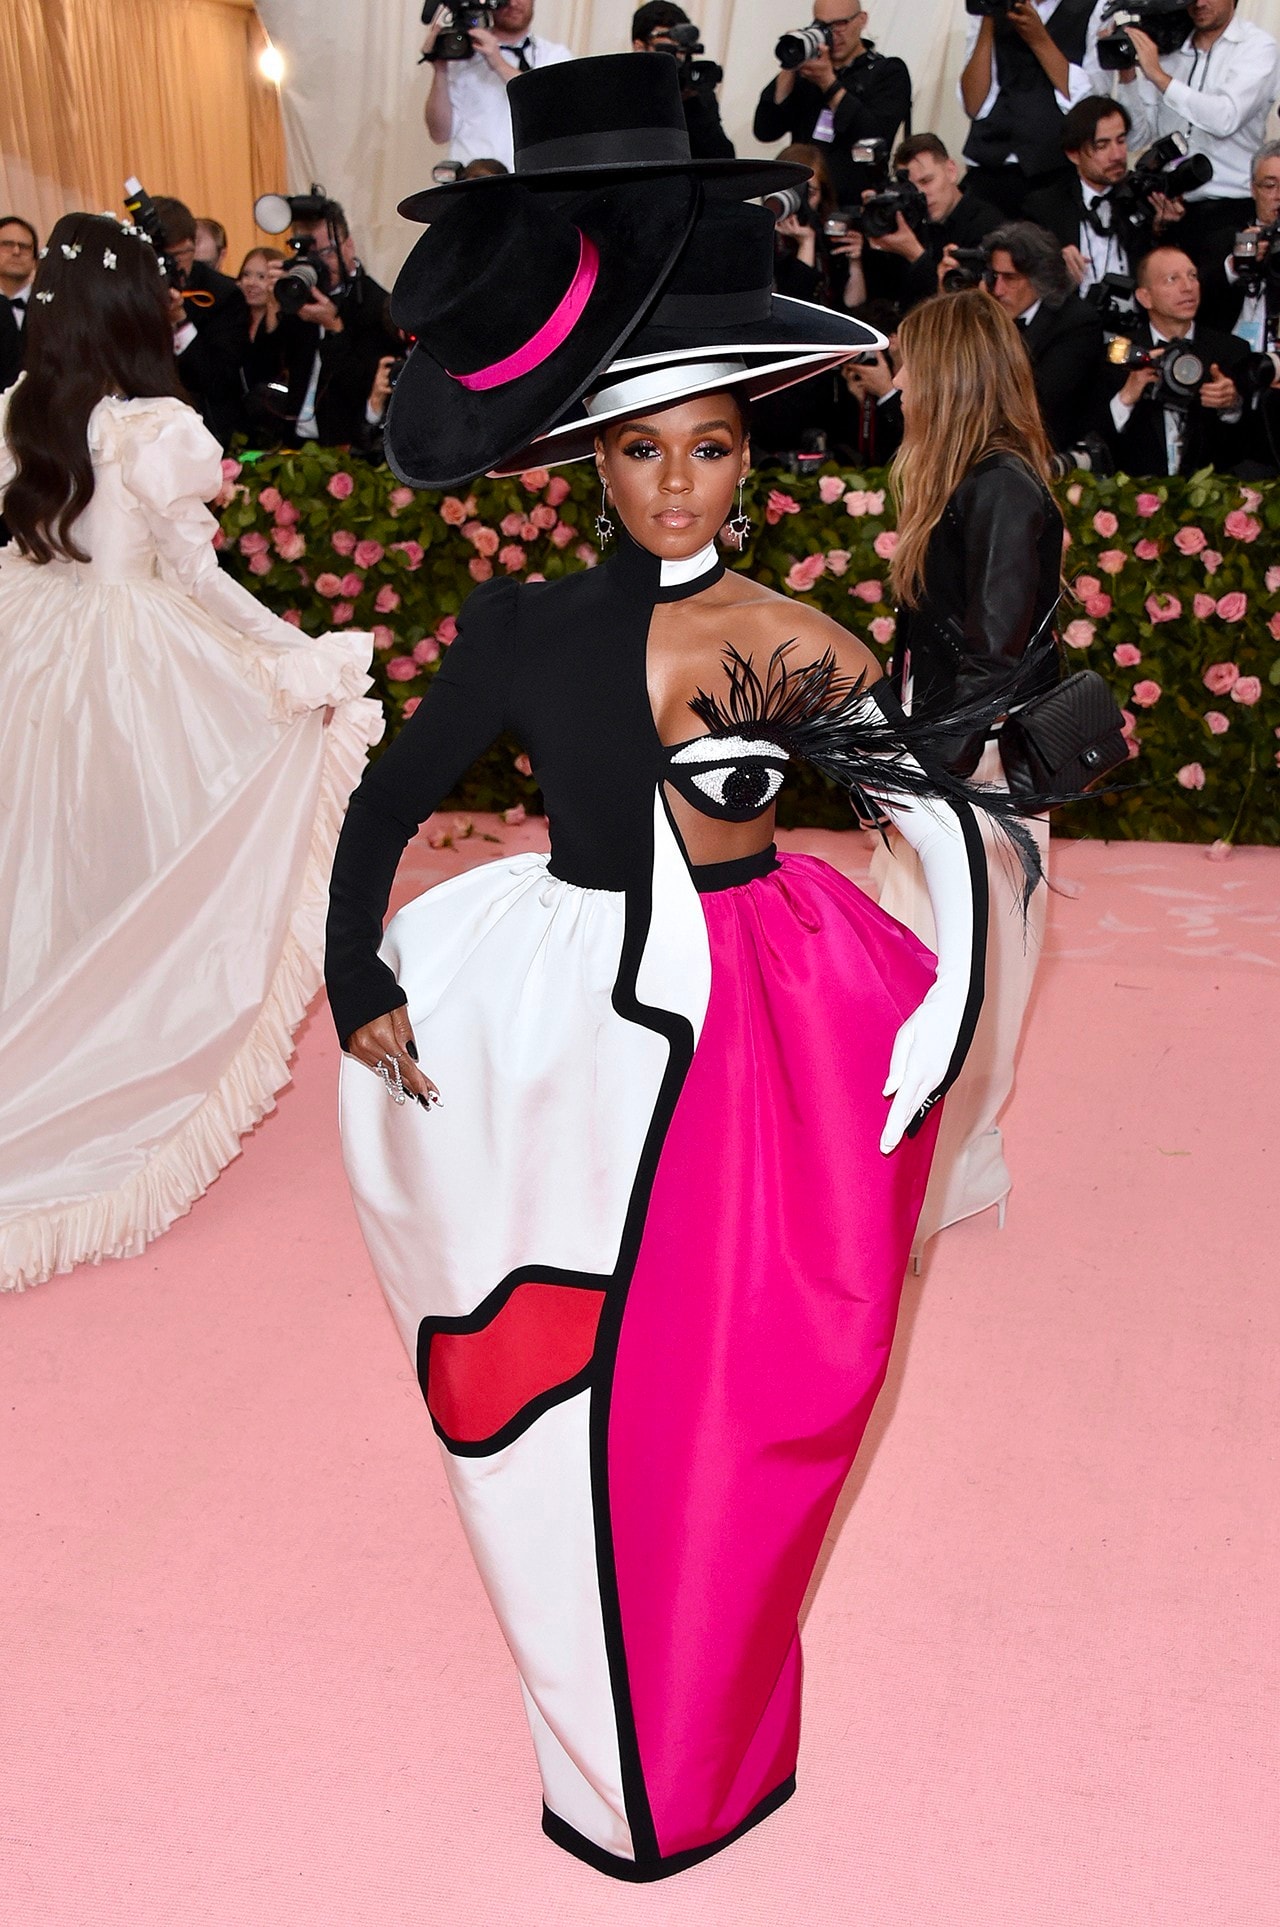 Janelle Monae Christian Siriano Dress Met Gala 2019 Red Carpet Camp Notes on Fashion Hats